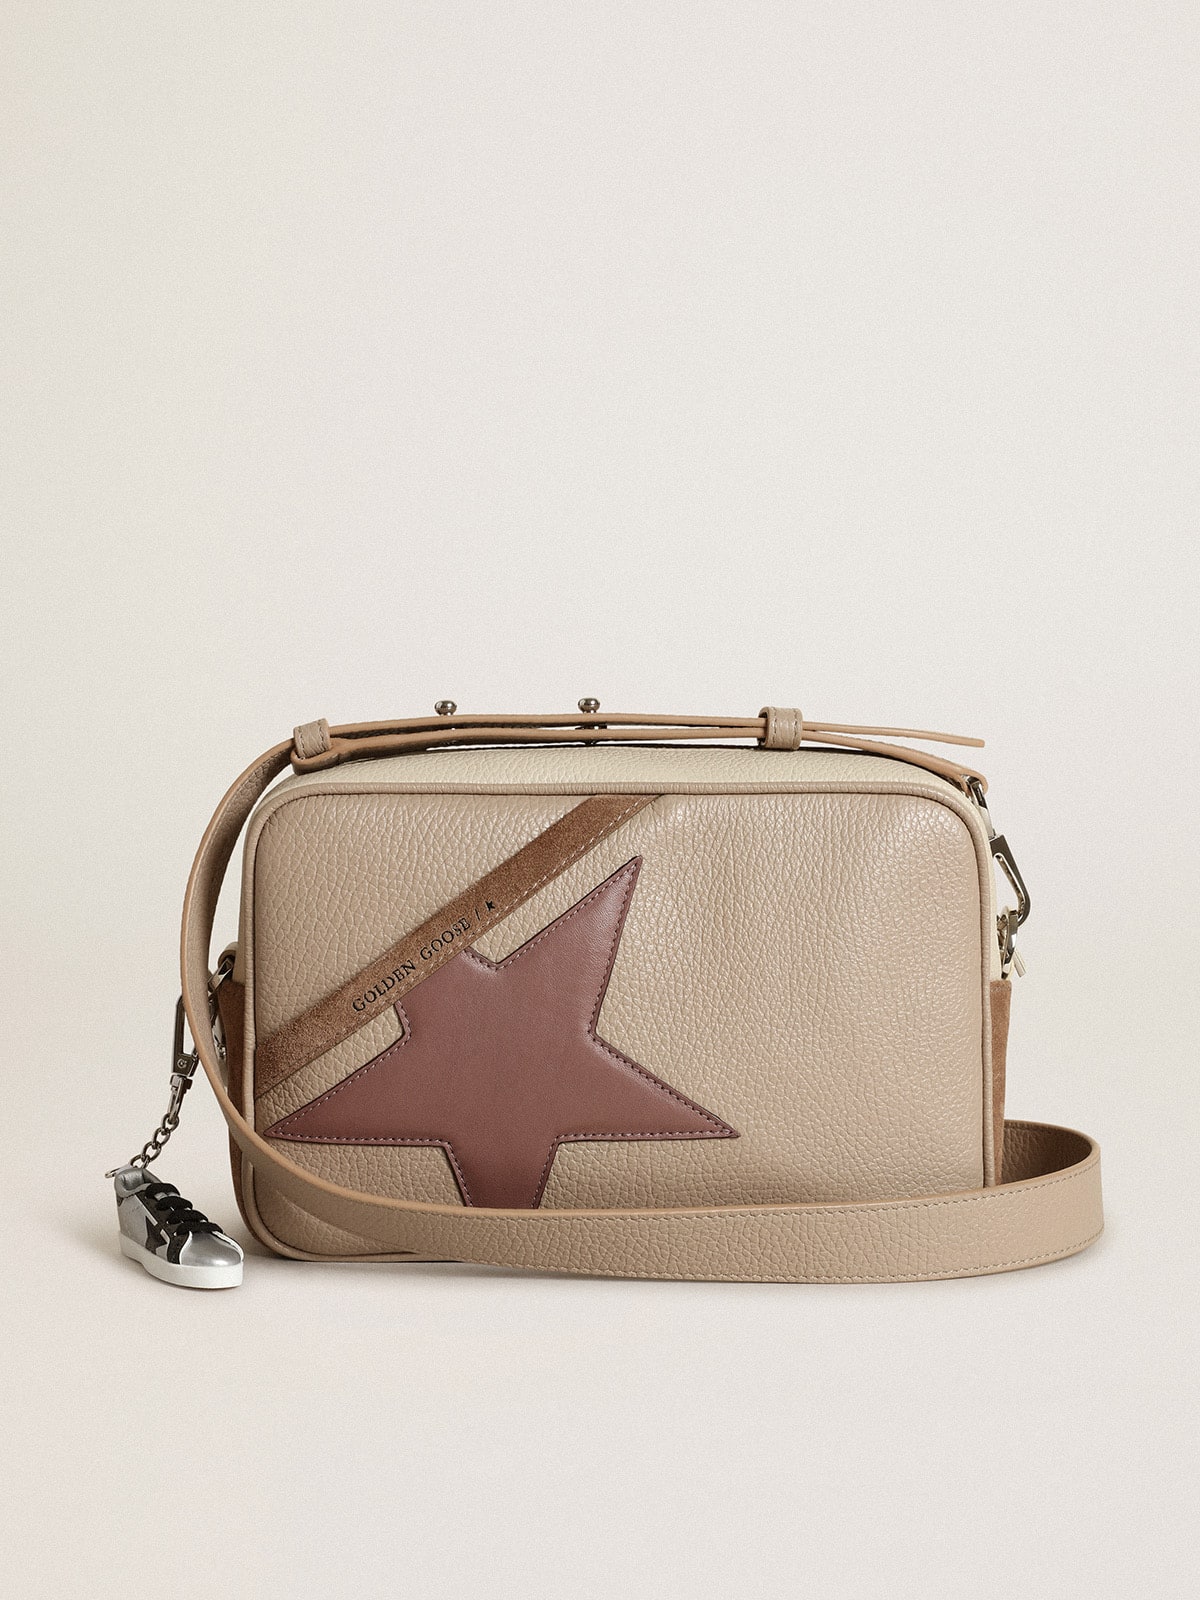 Golden Goose Star Bag Large In Off-white Hammered Leather GBP505.0